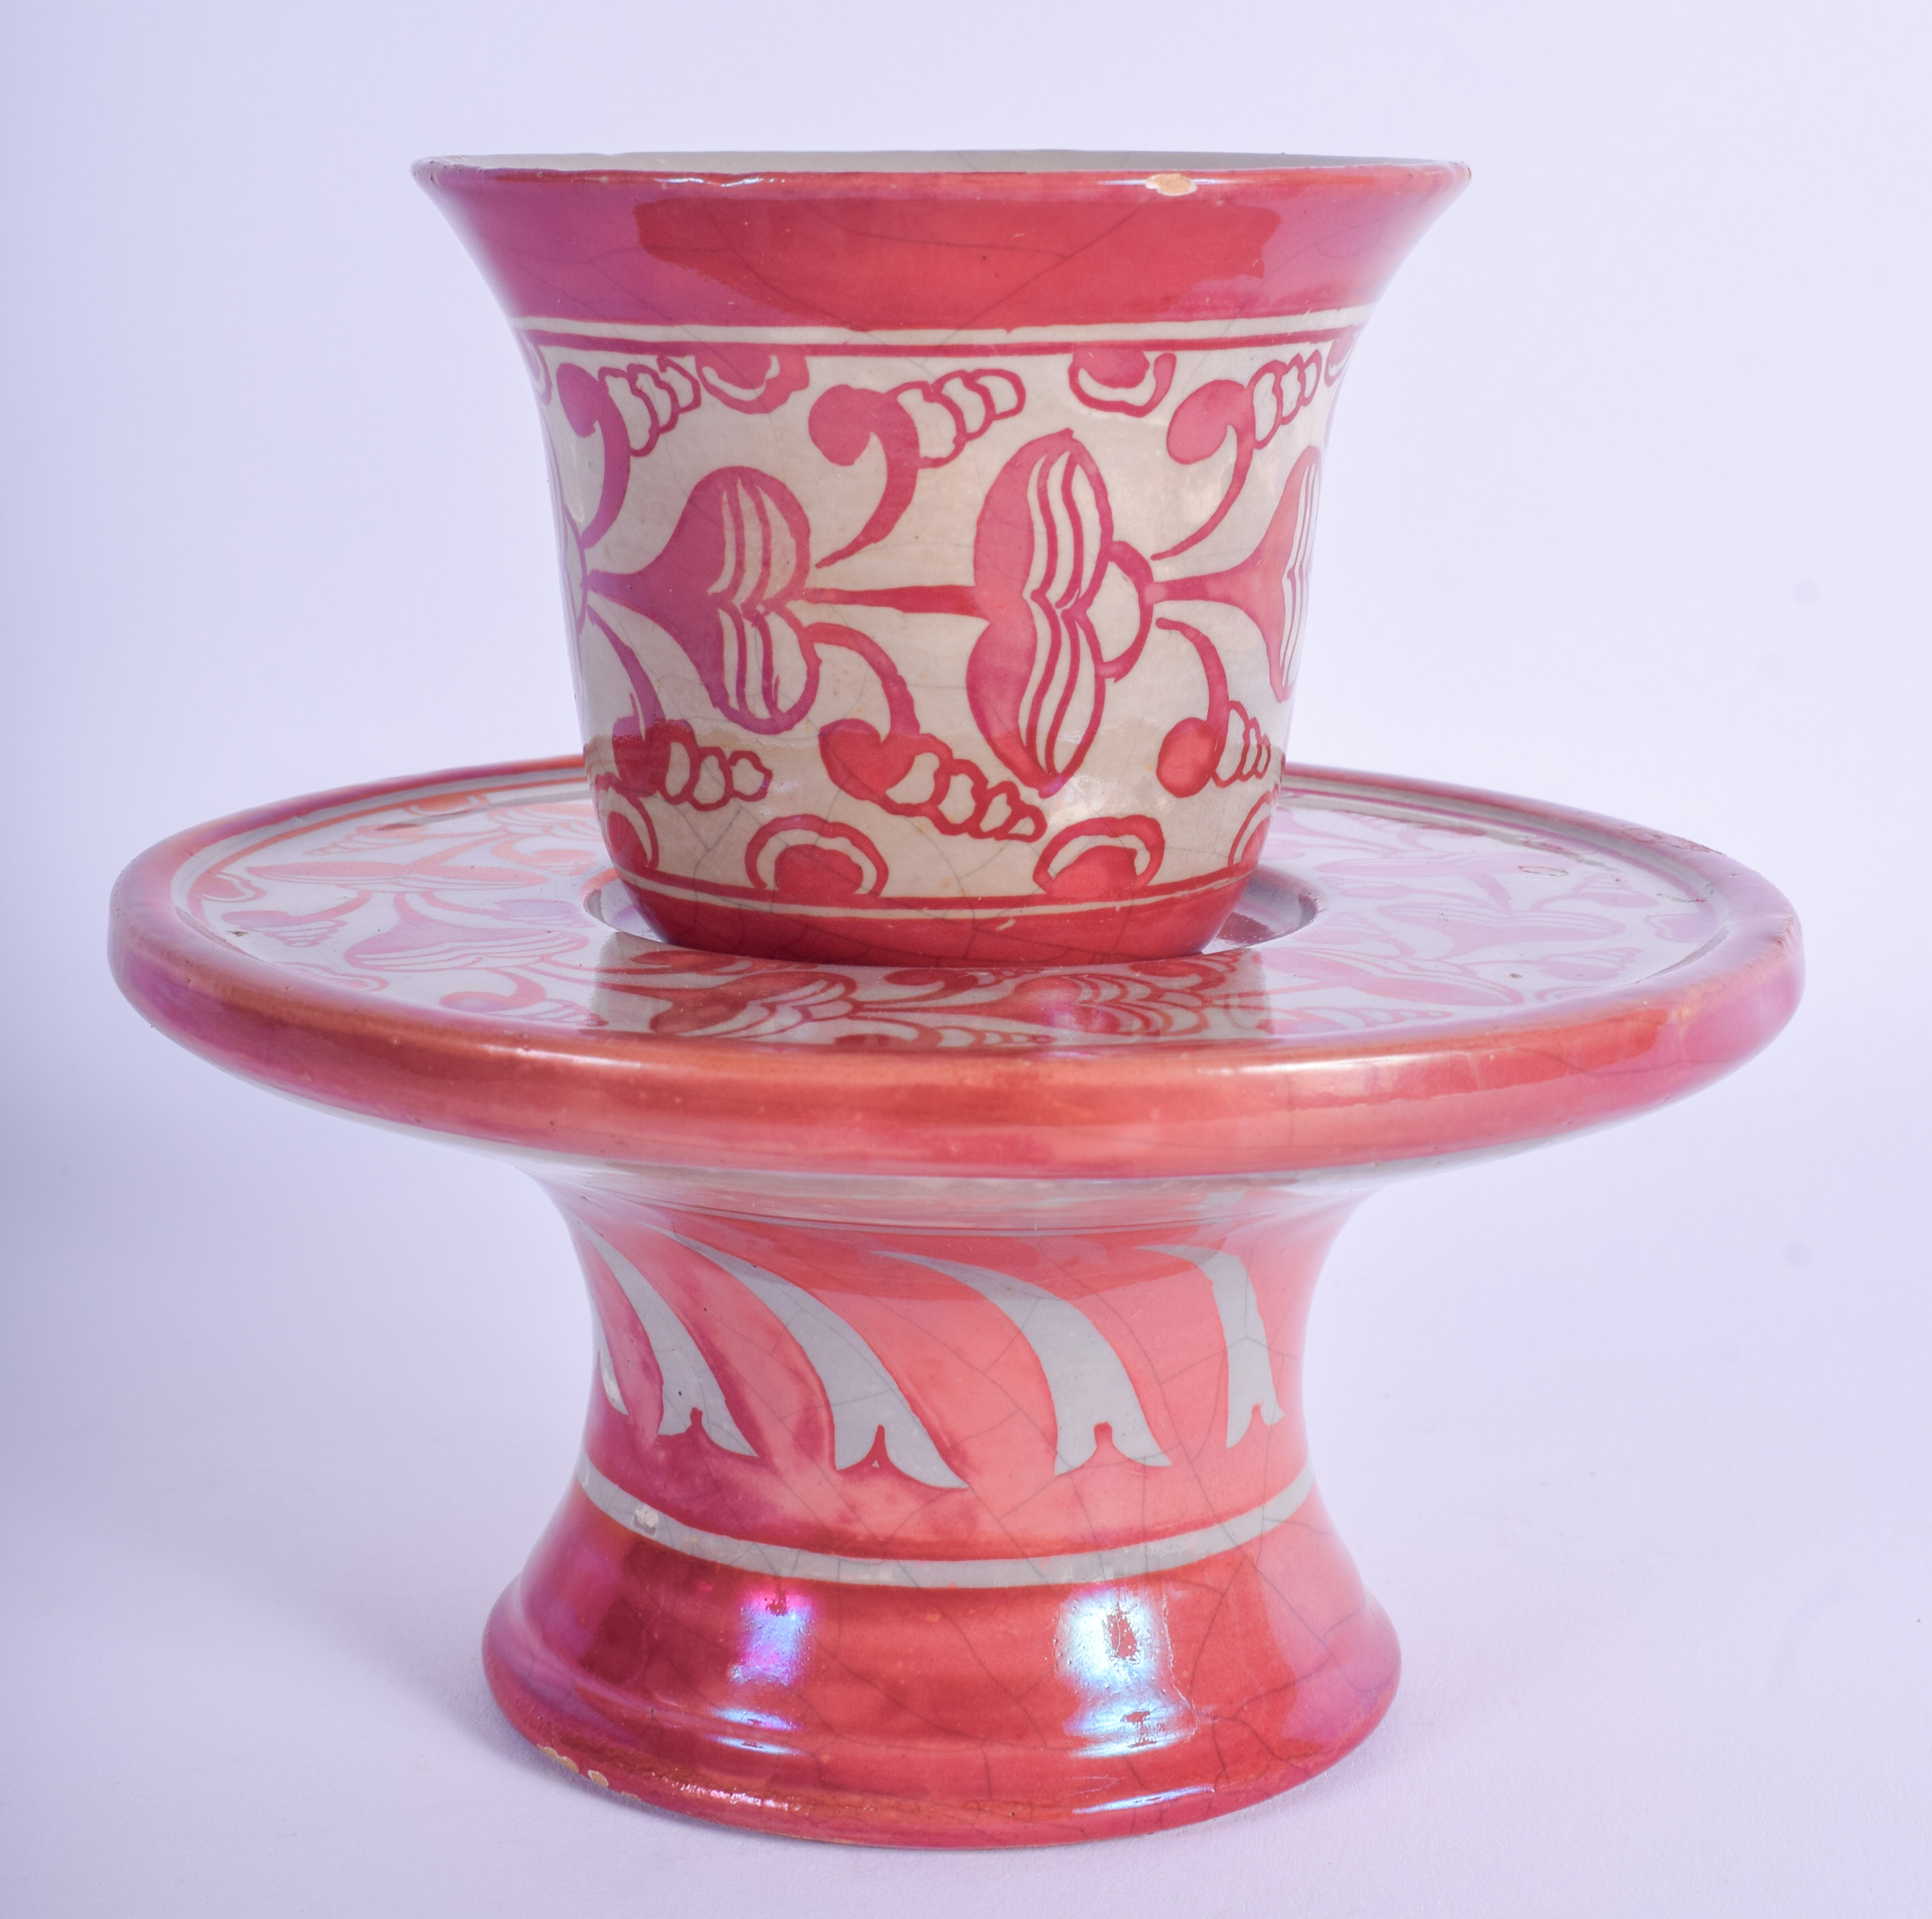 A RARE ANTIQUE CONTINENTAL HISPANO MORESQUE RED LUSTRE TEA BOWL ON STAND painted with flowers and vi